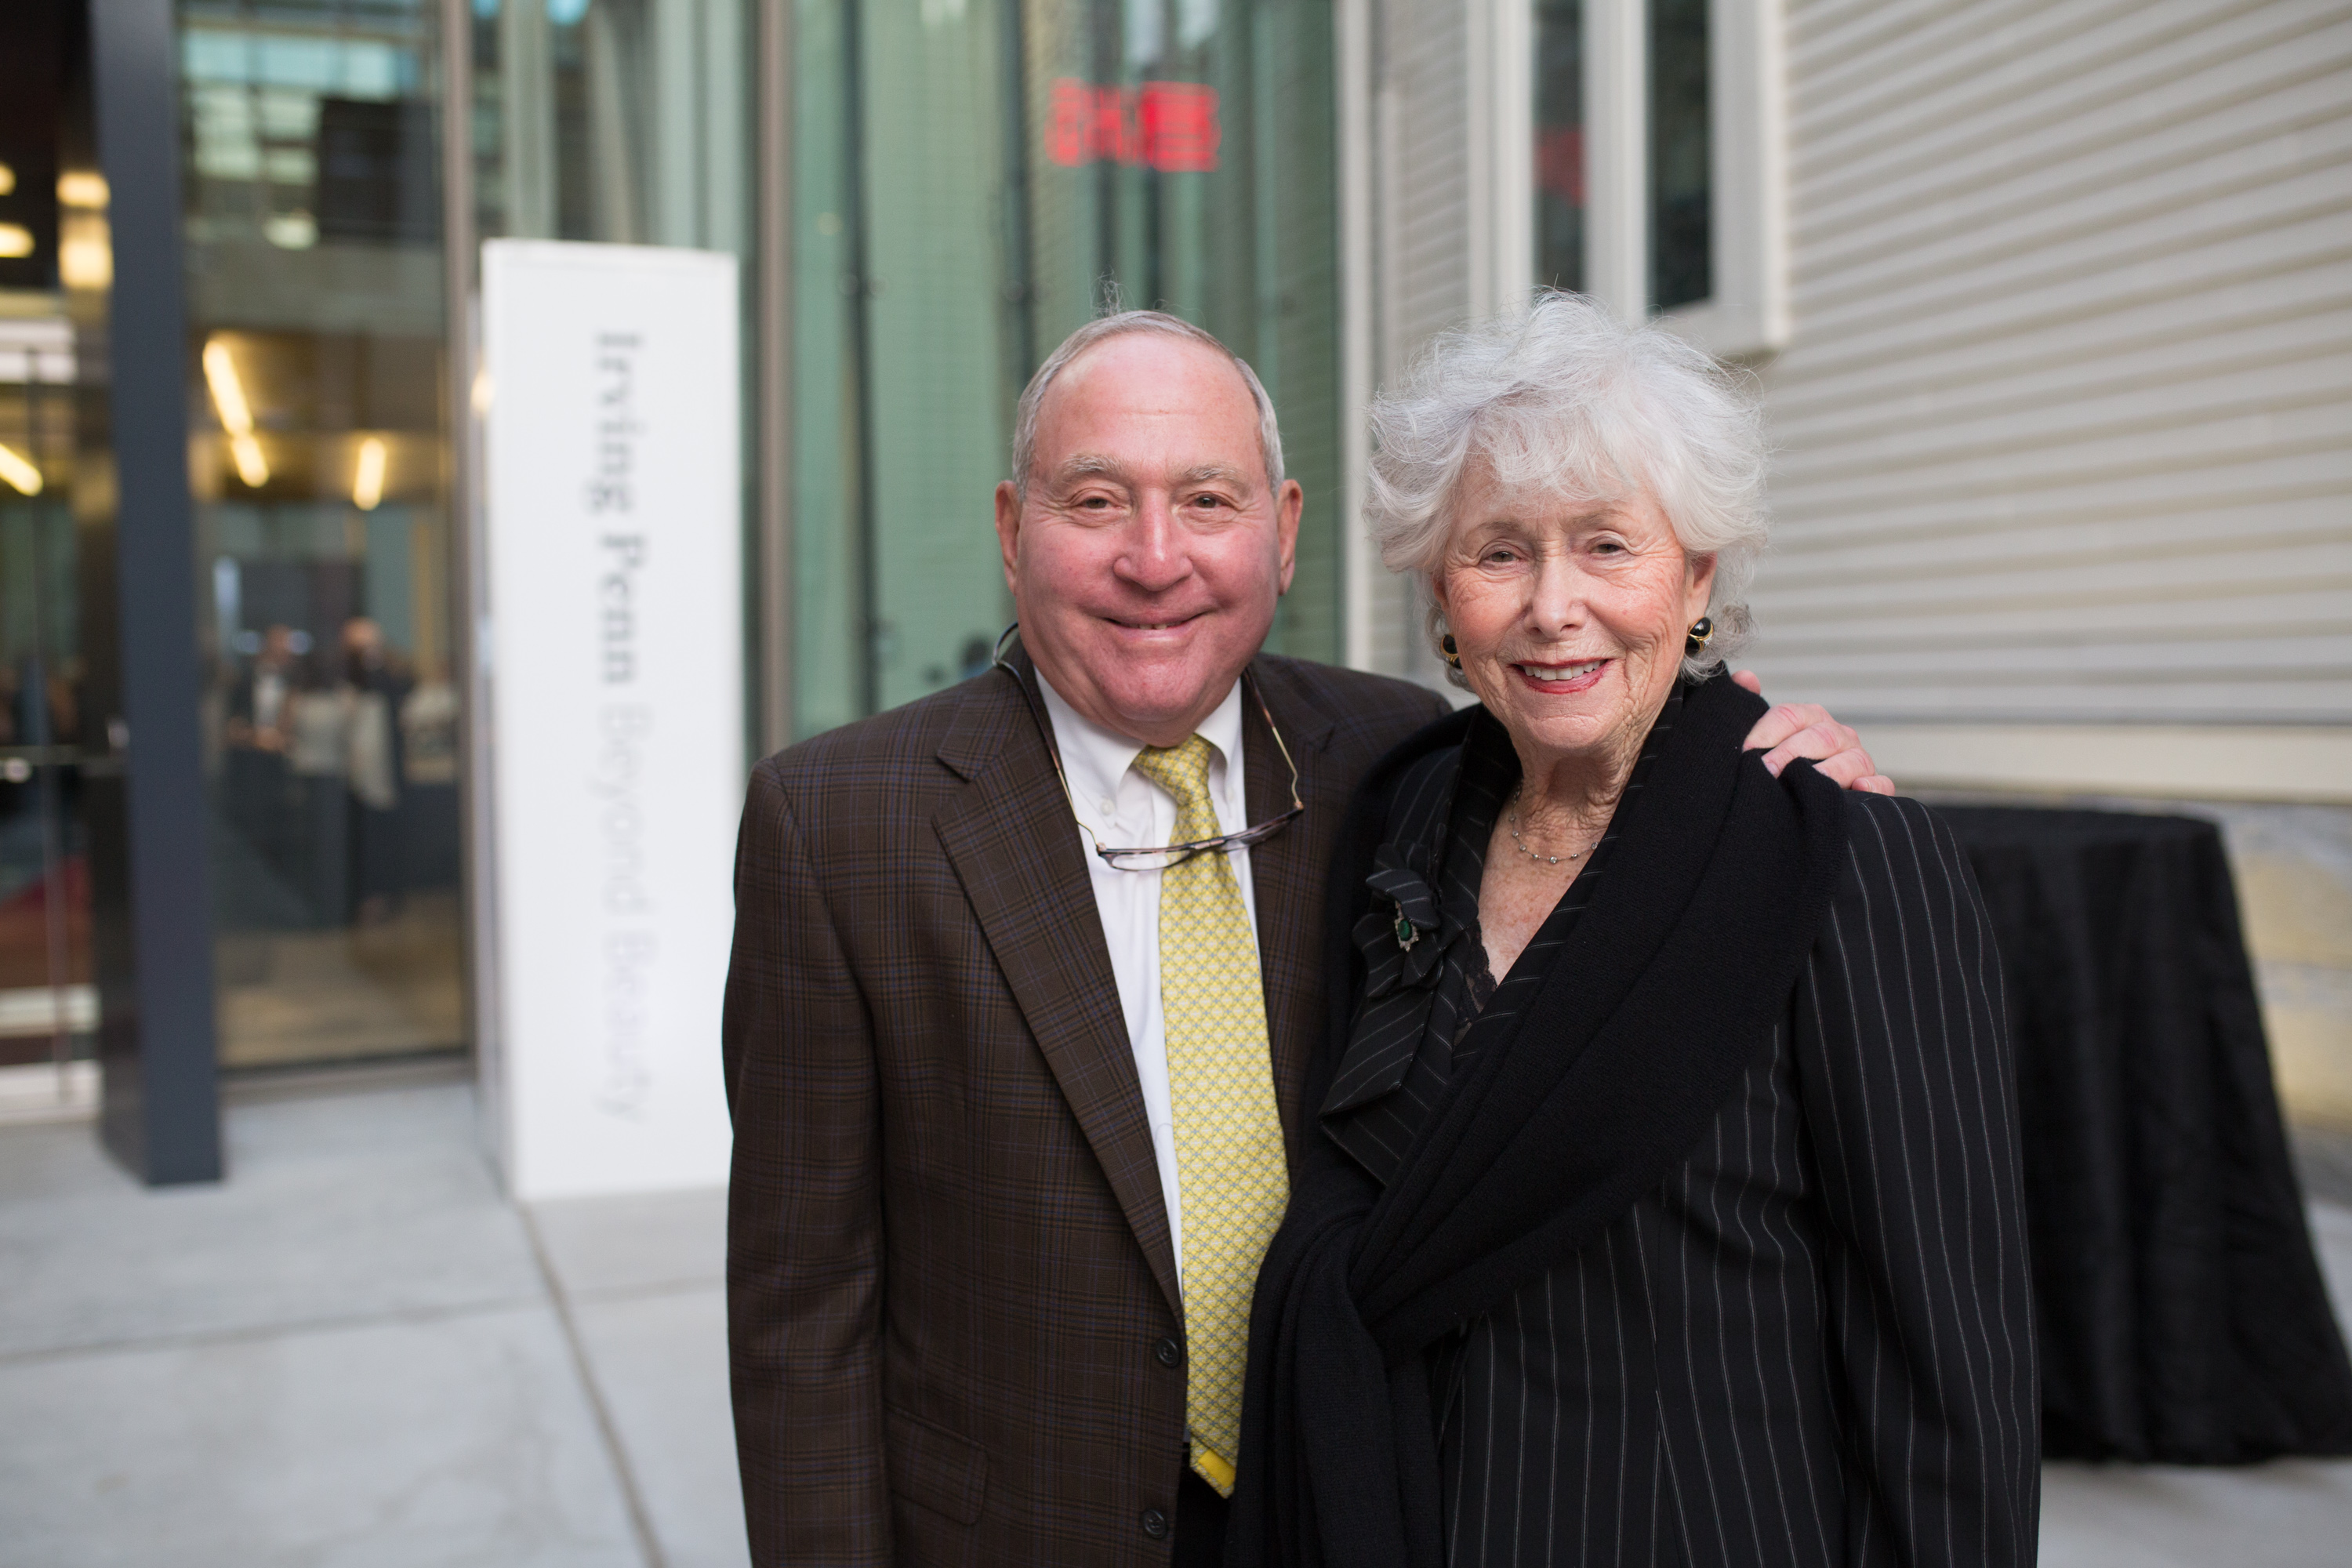 Peter and Paula Lunder pose in front of the Lunder Arts Center